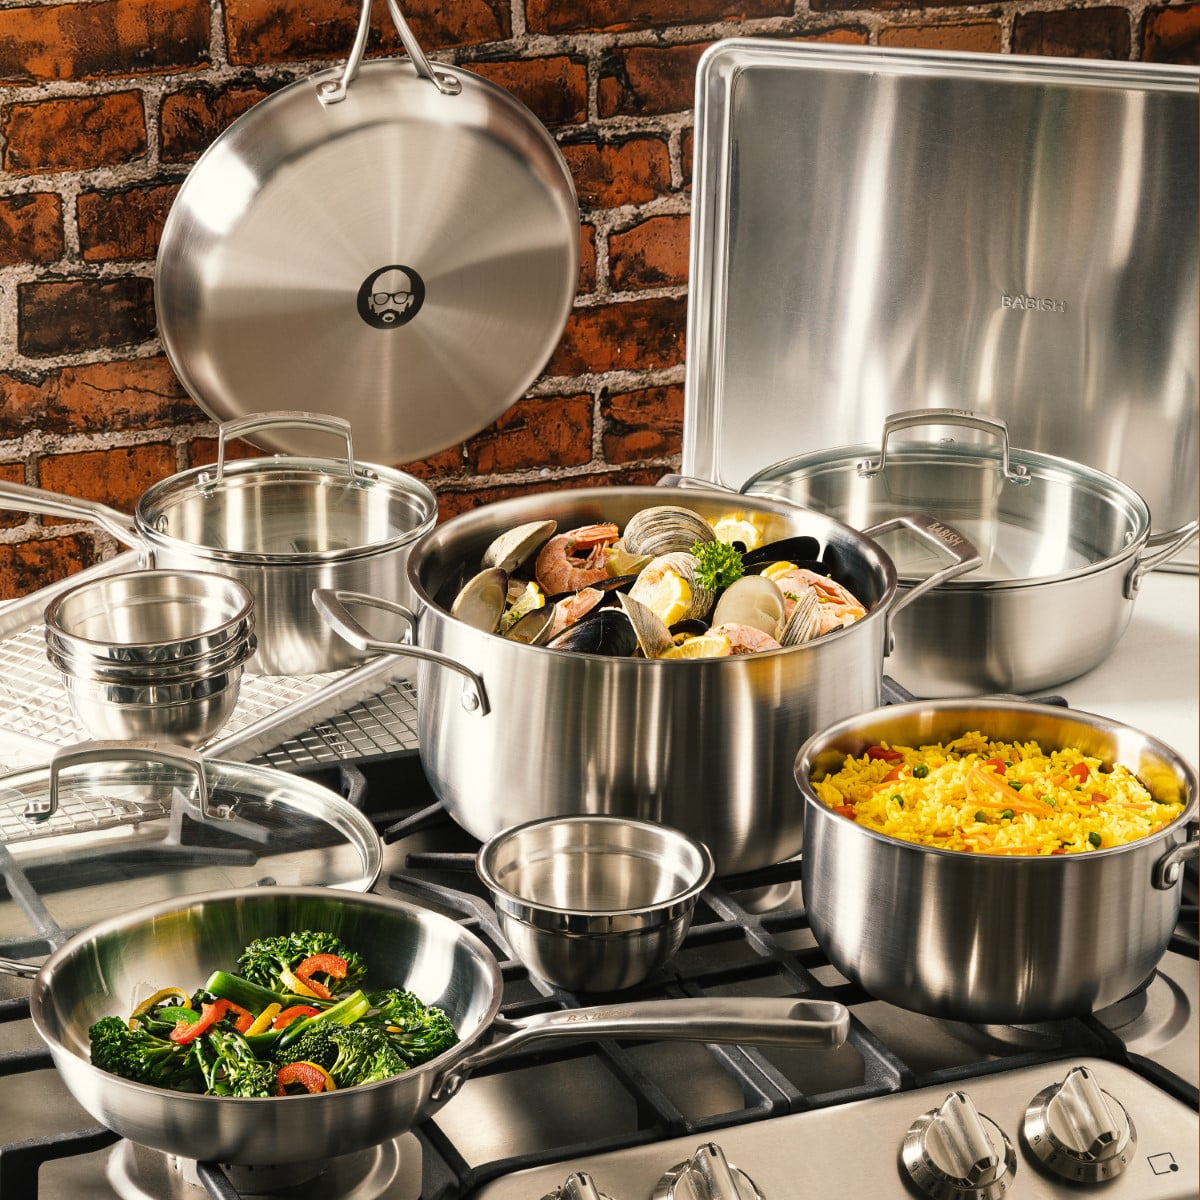 Babish 12-Piece Mixed Material (Stainless Steel, Carbon Steel, & Aluminum)  Professional Grade Cookware Set W/ Baking Sheets 